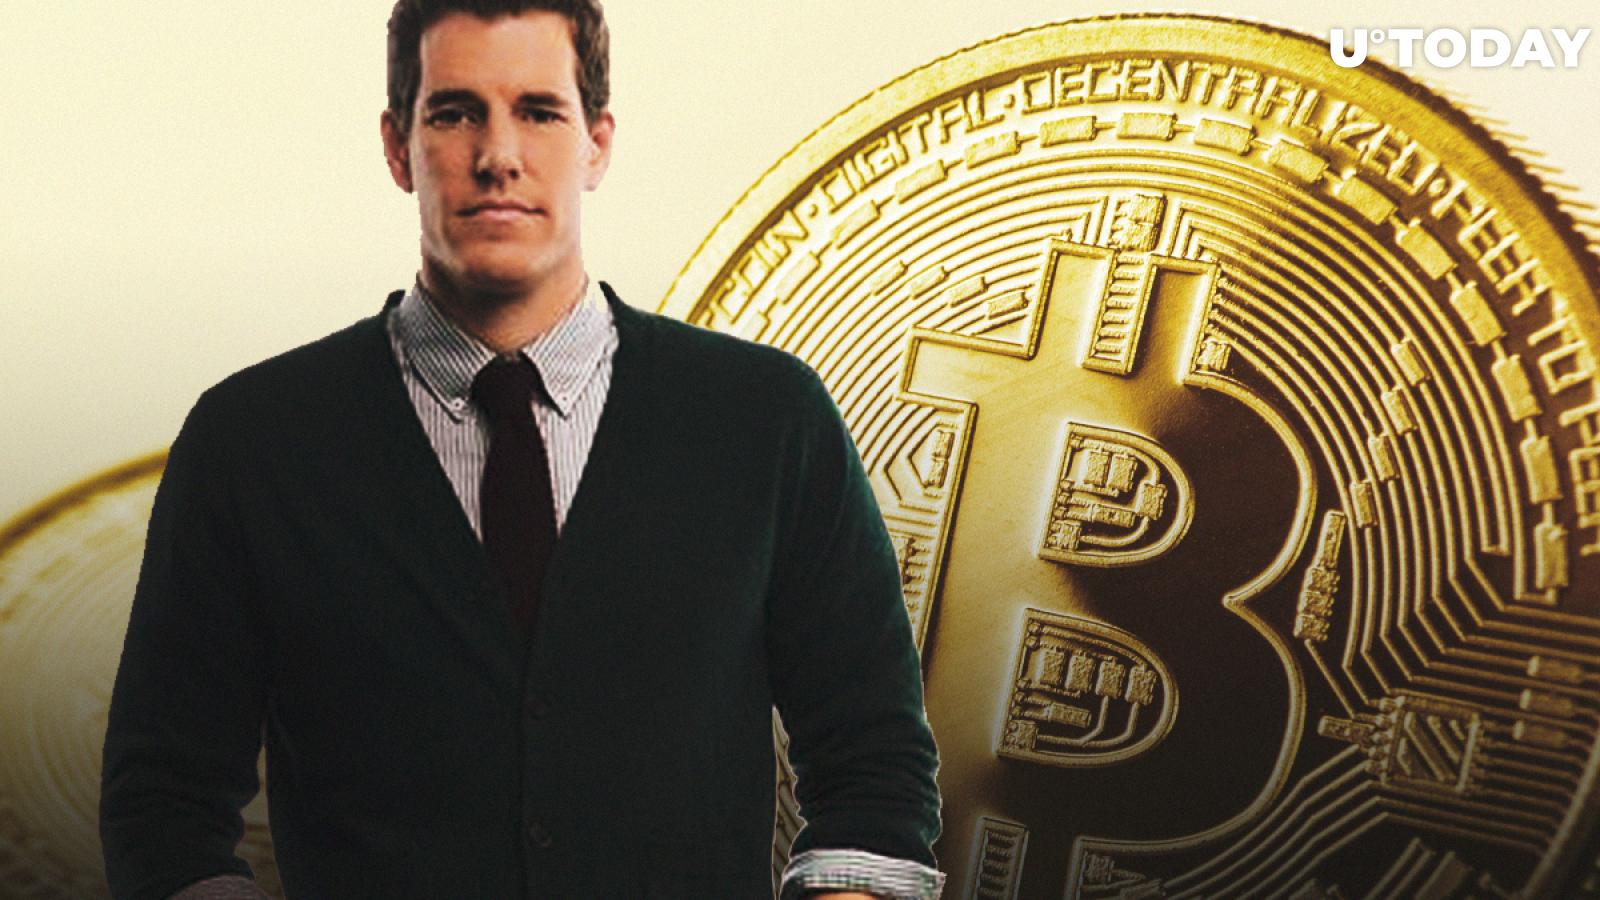 17 Trillion Reasons Why You Should Own Bitcoin, According to Gemini Boss Cameron Winklevoss